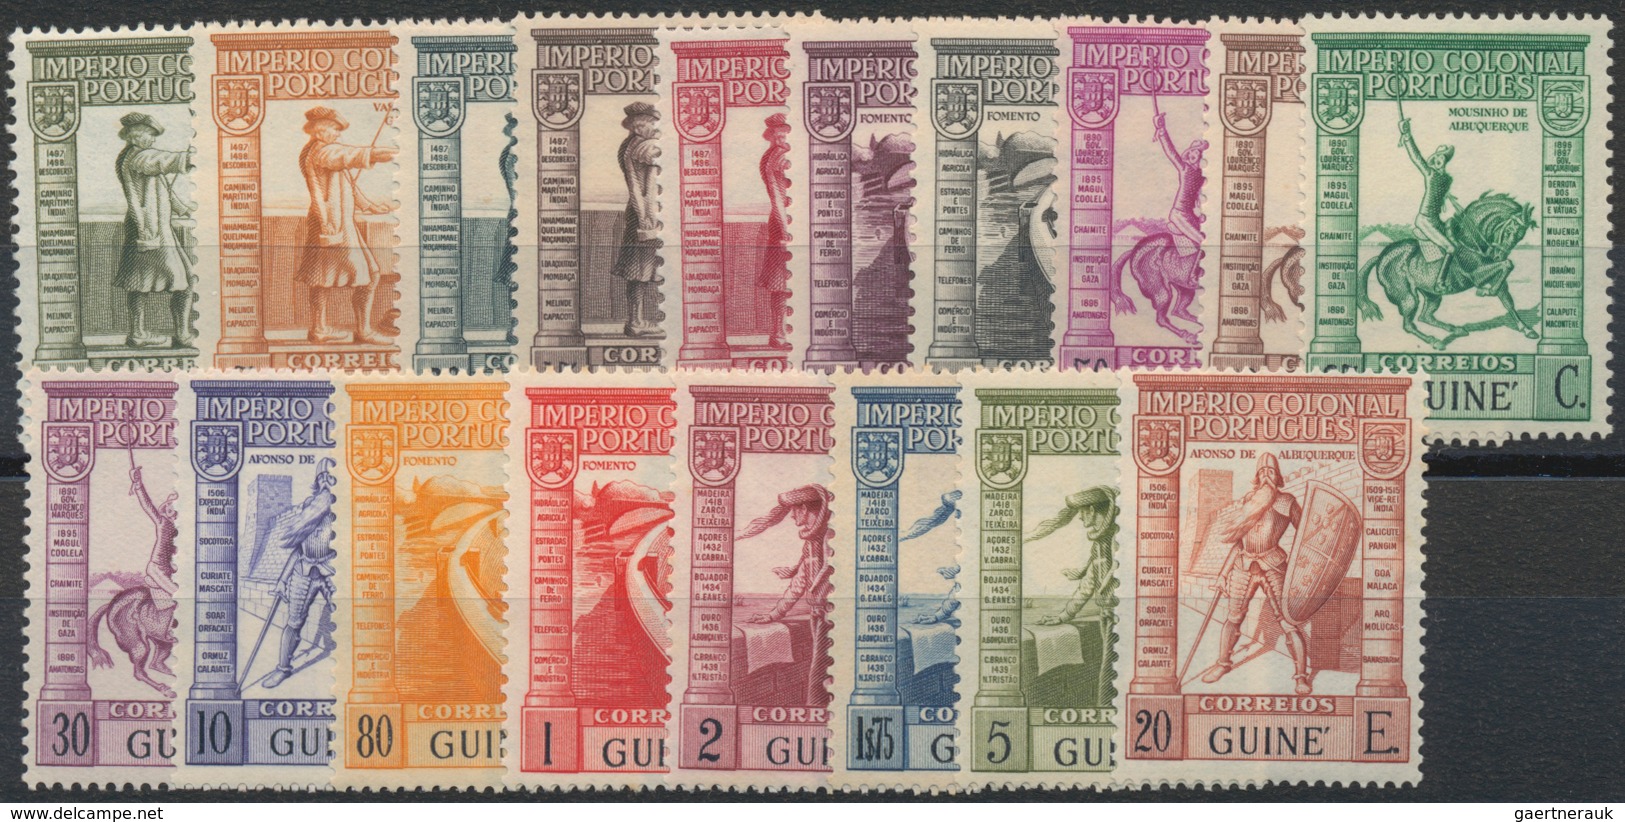 Portugiesisch-Guinea: 1985/1975, accumulation/stock of the colonial period, sorted on stockcards, in